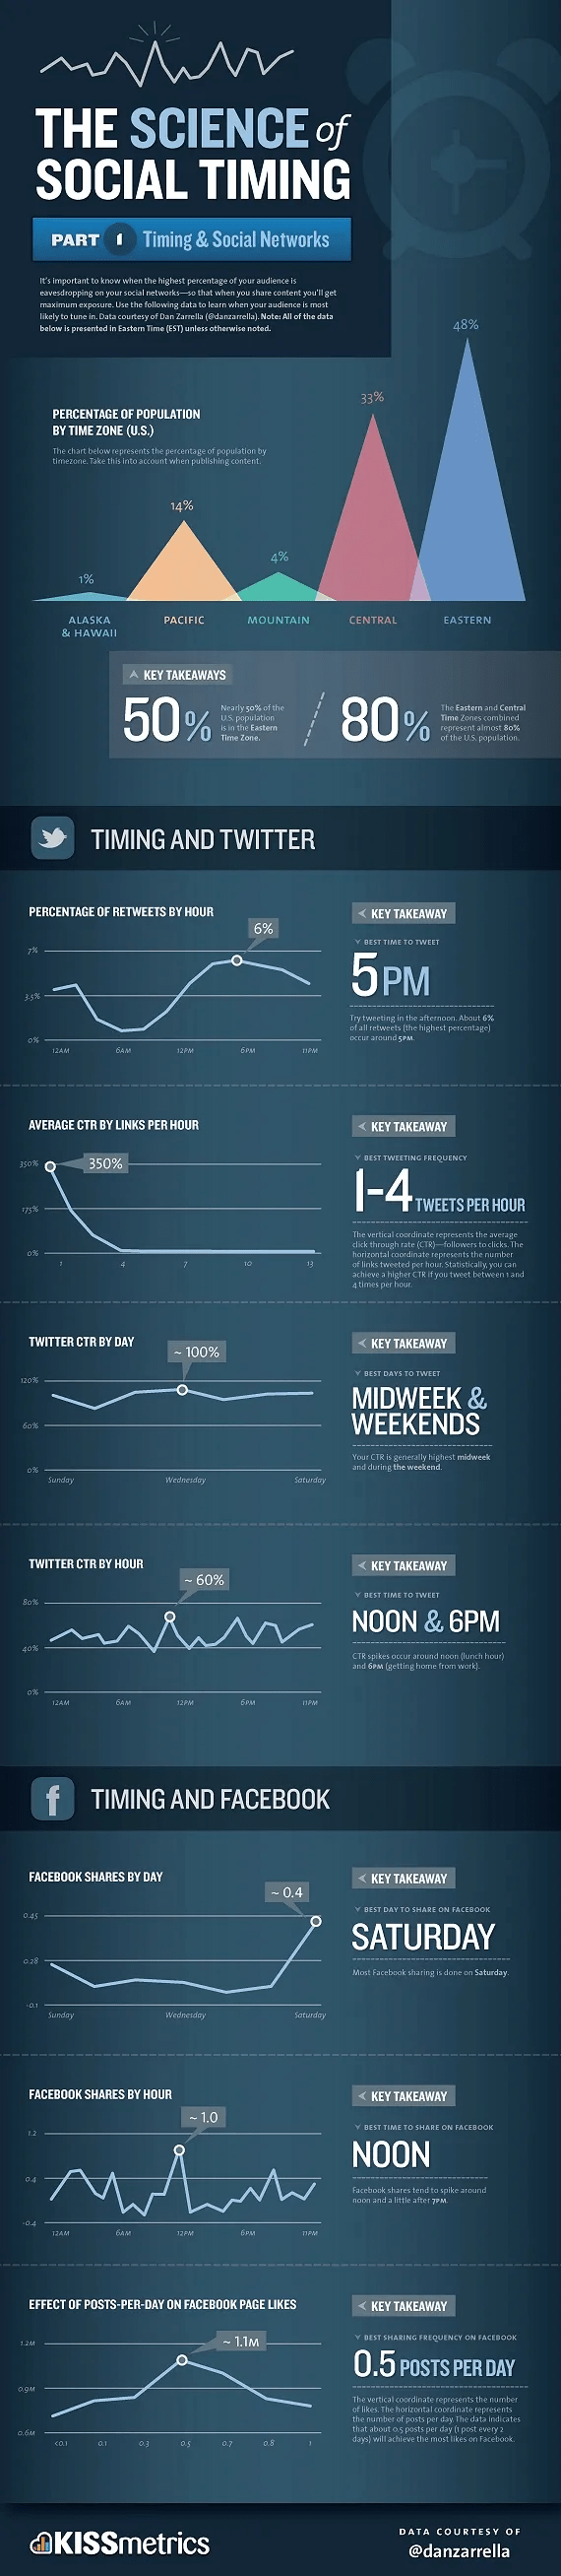 The Science Of Social Timing: 3 Parts Infographic